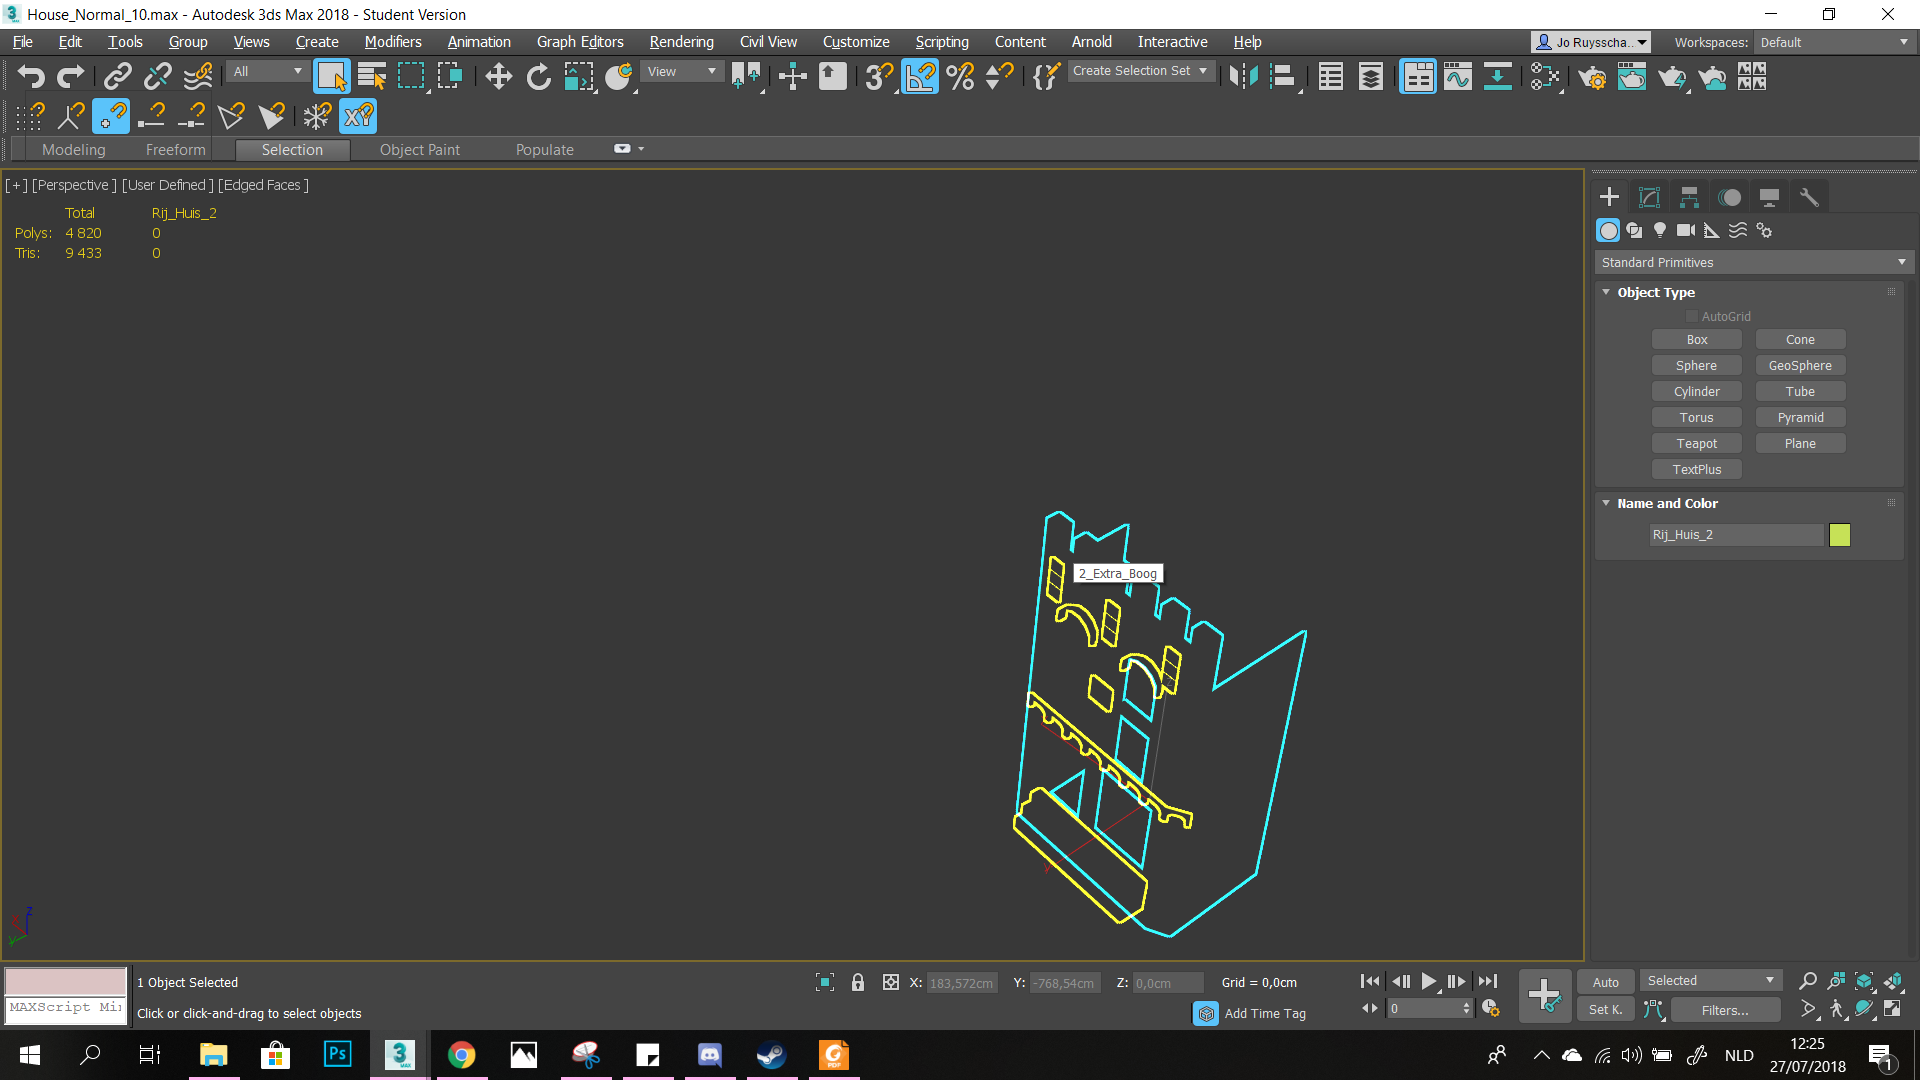 Object disappeared in - Community - 3ds Max